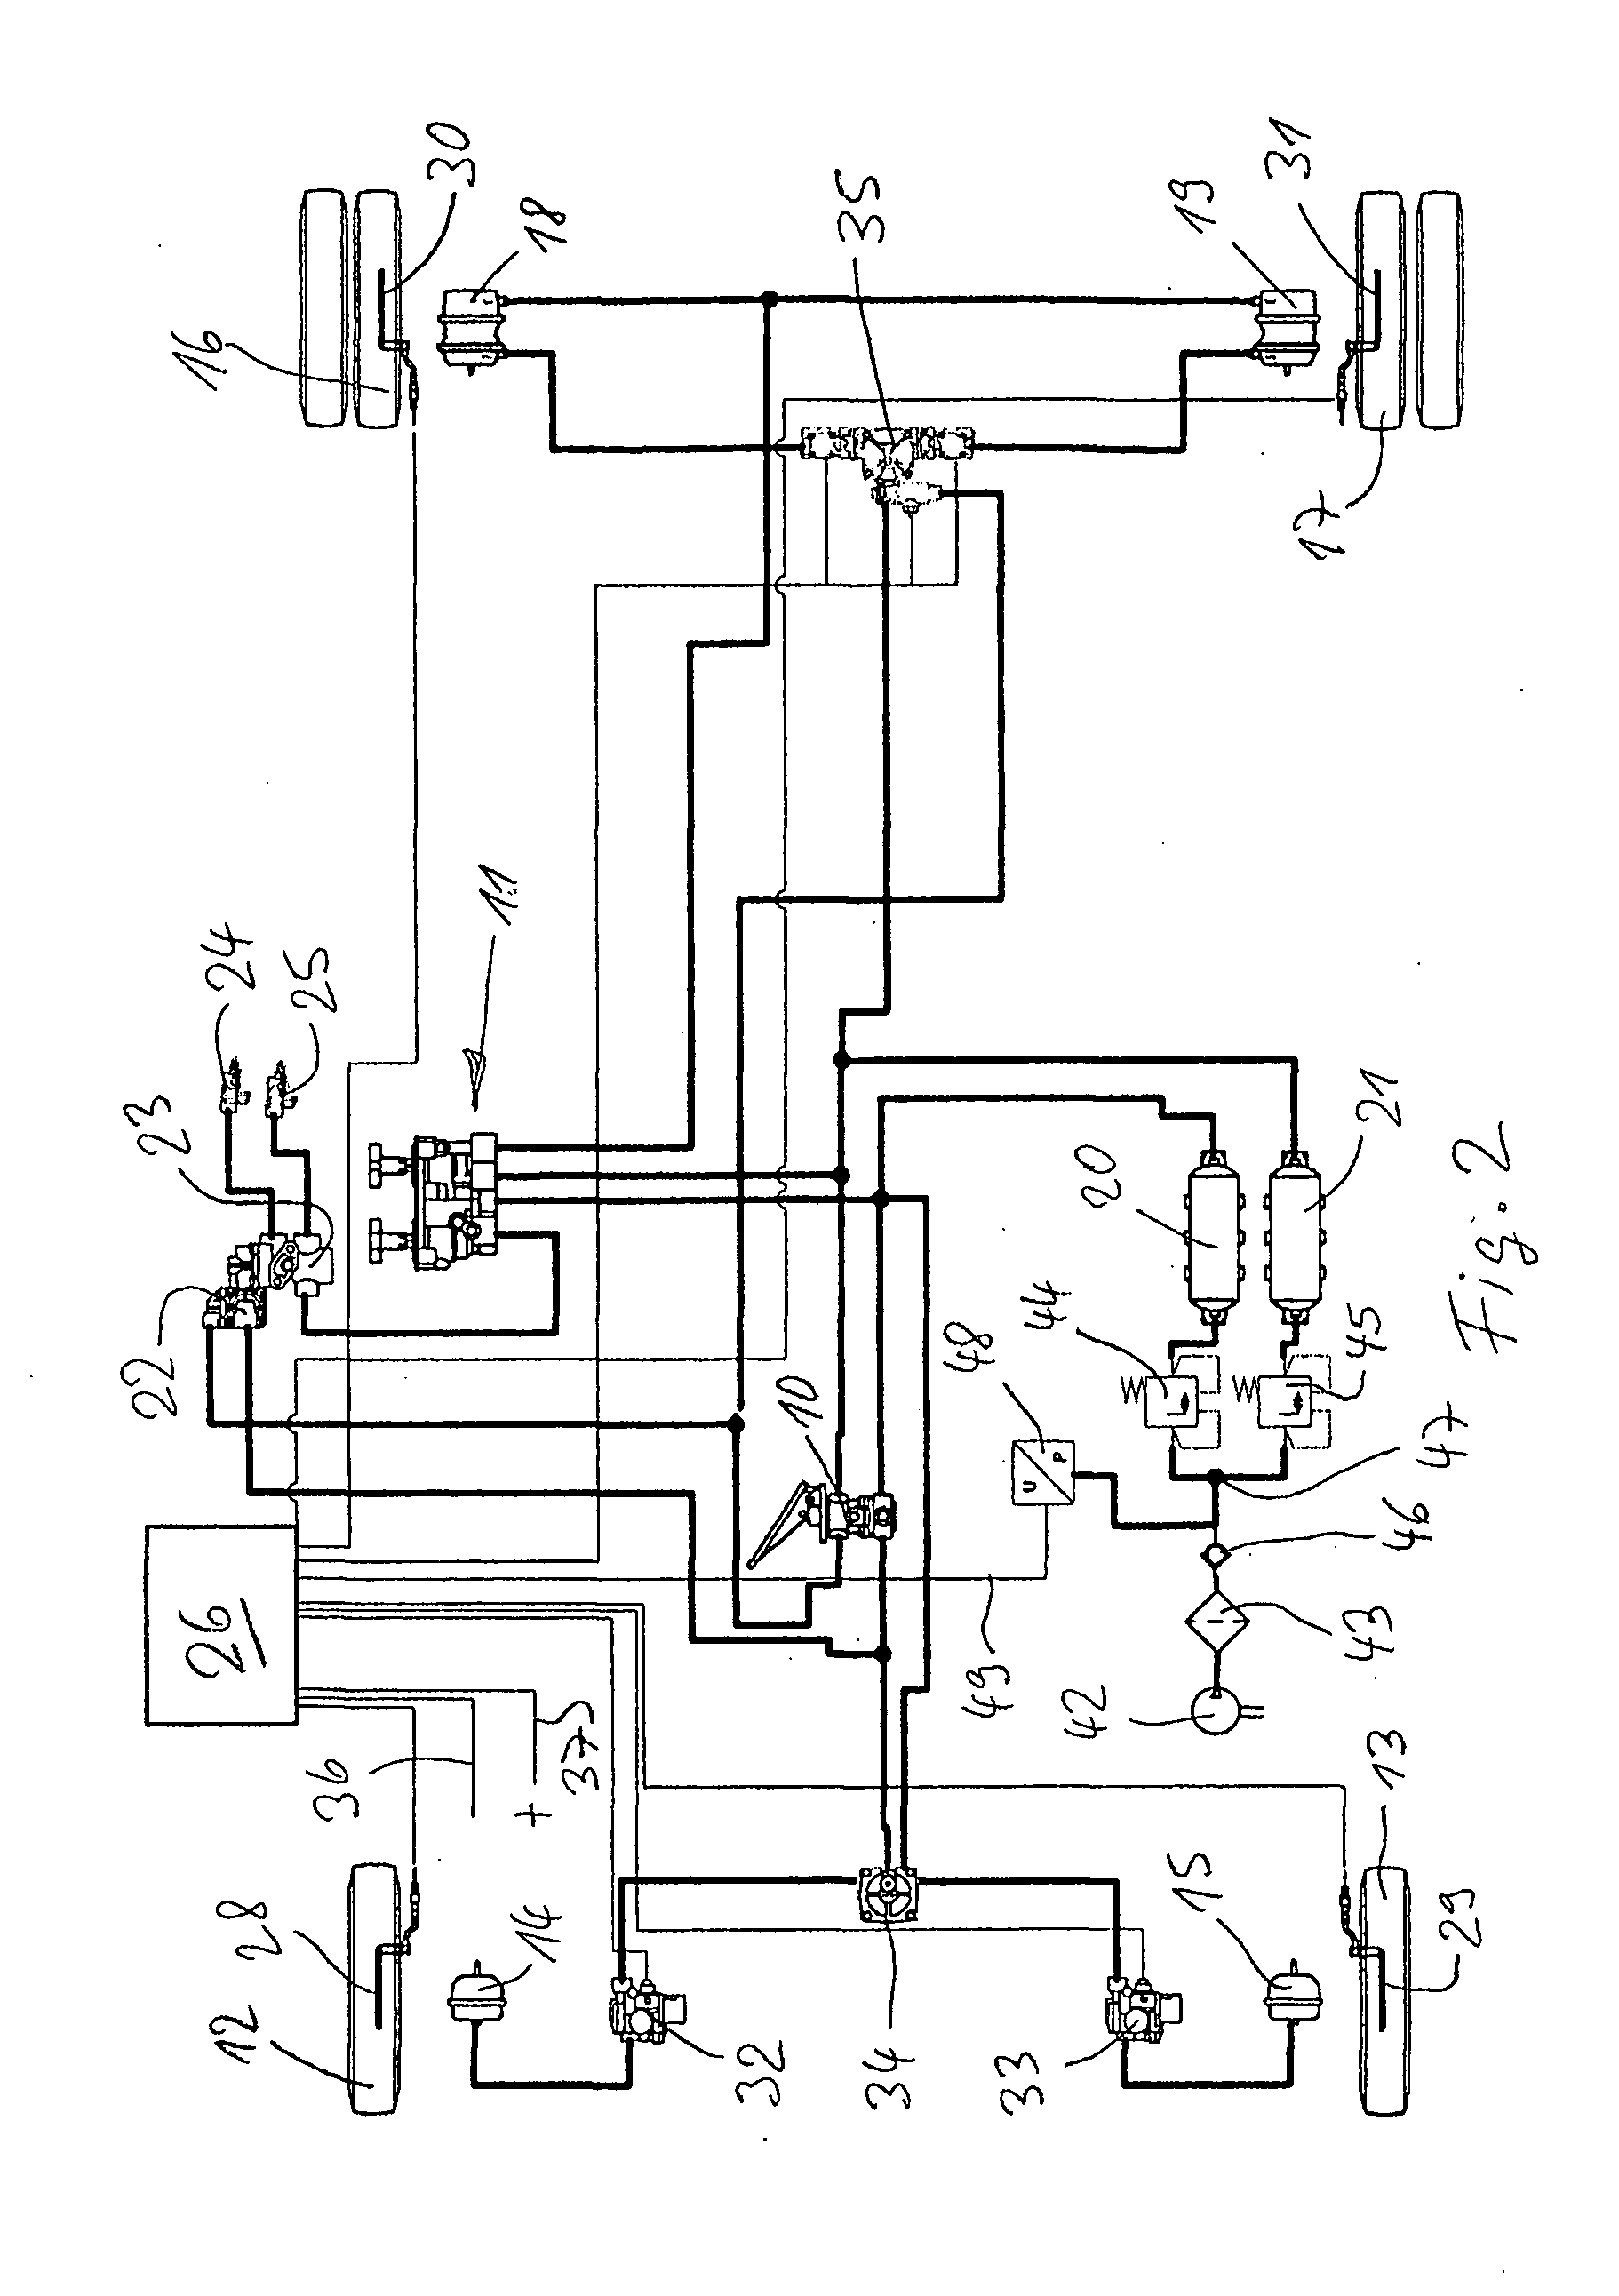 Method and Device for Operating Compressed-Air Brakes